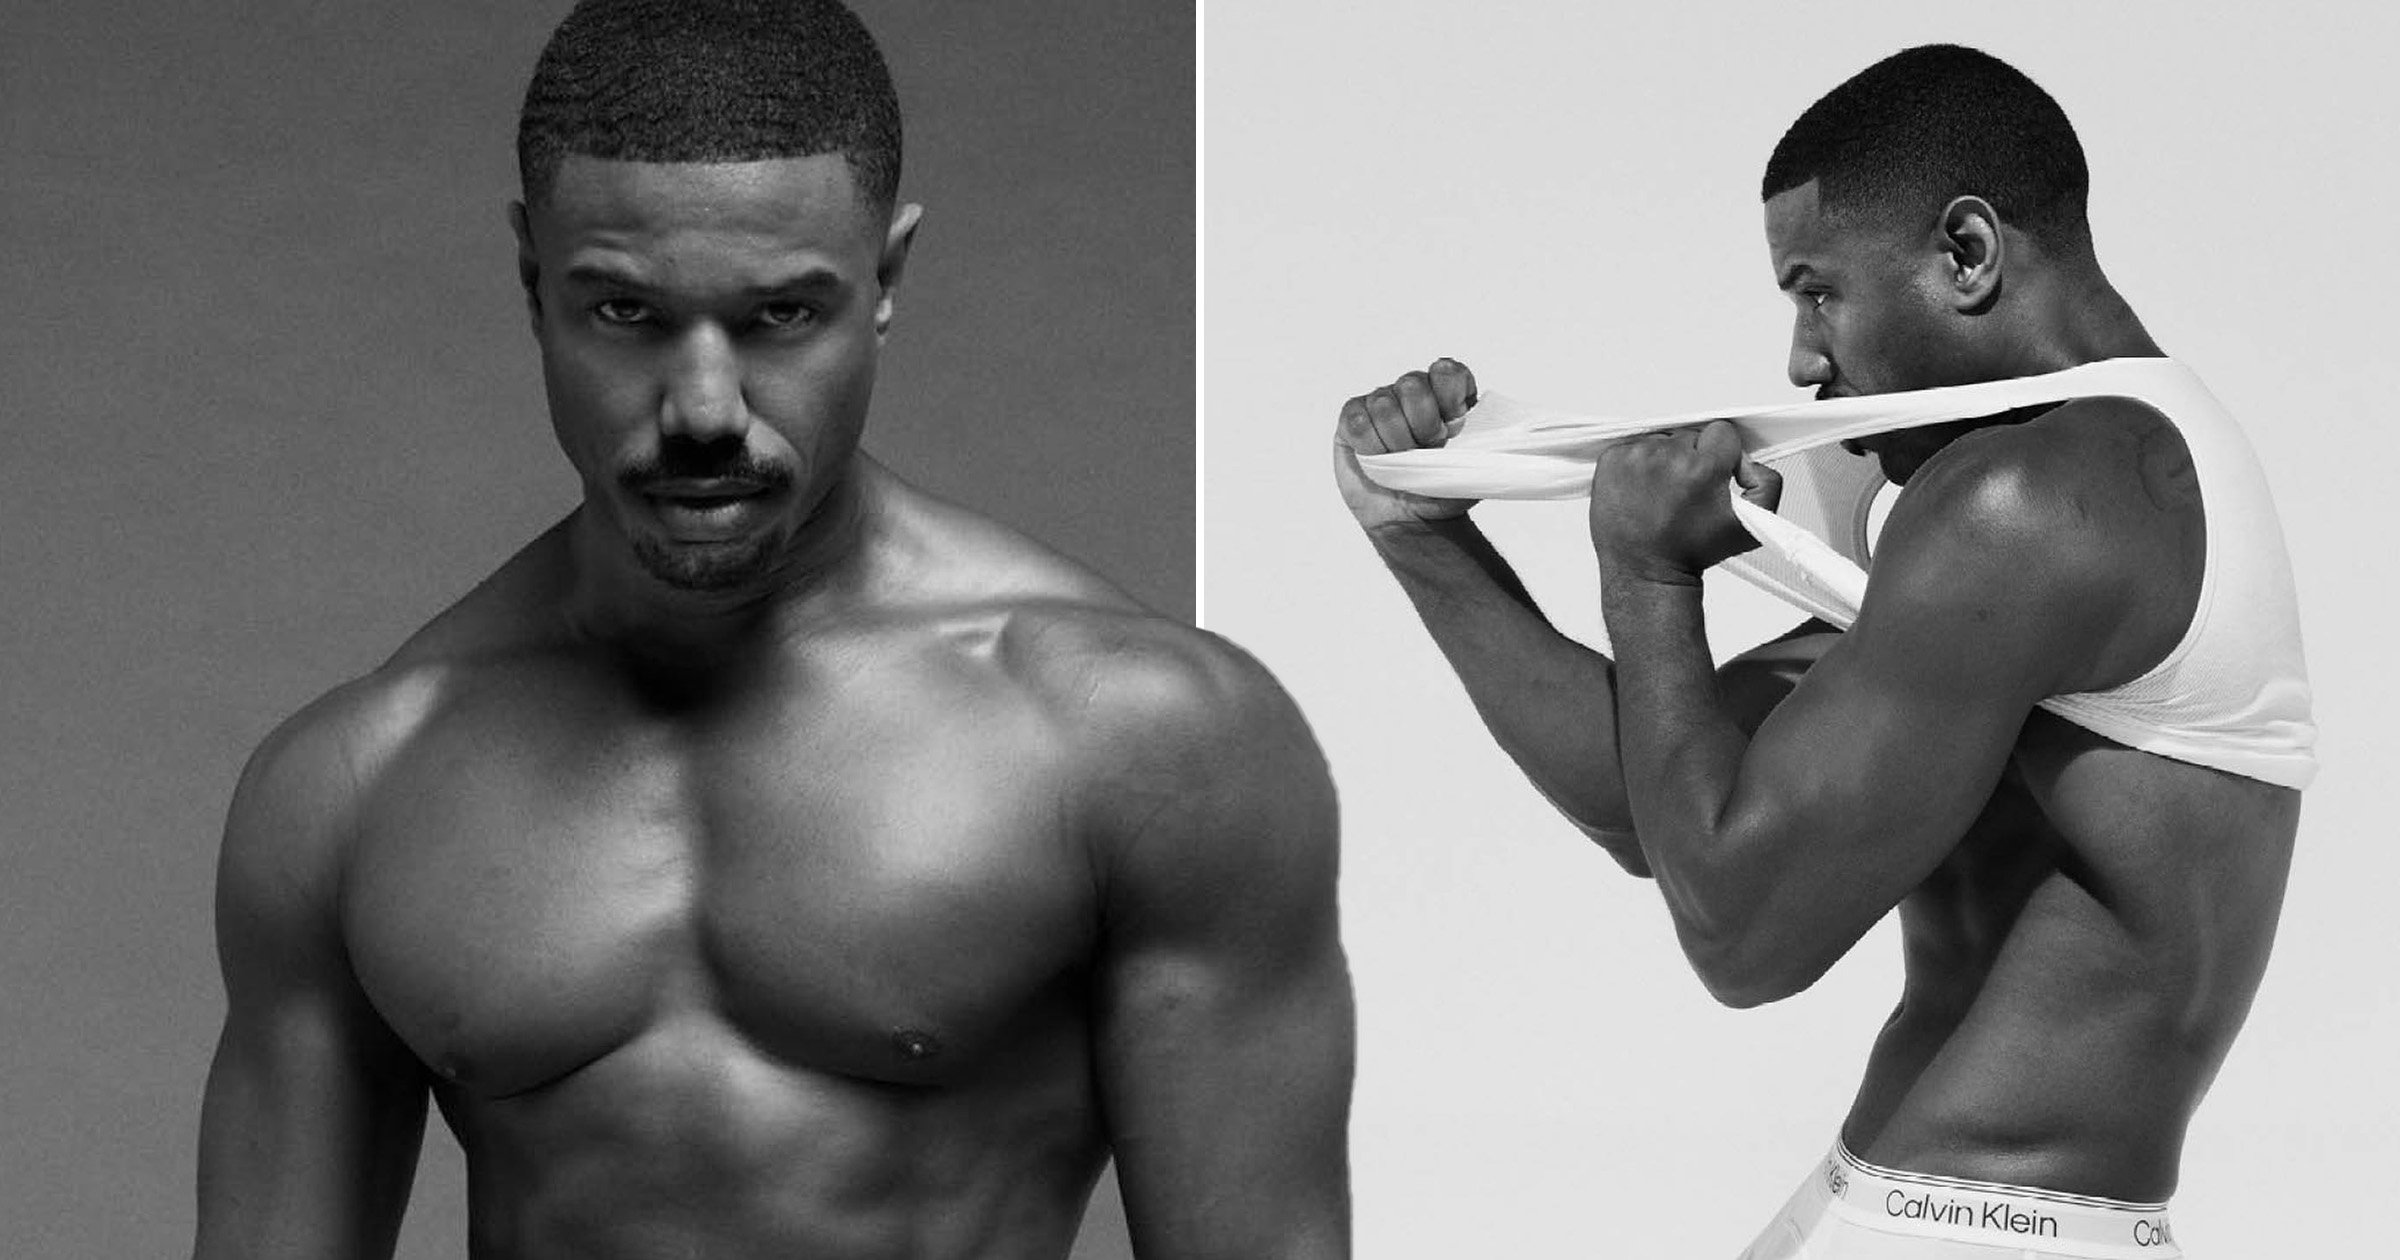 Michael B Jordan strips off for stunning Calvin Klein campaign and the internet has zero chill